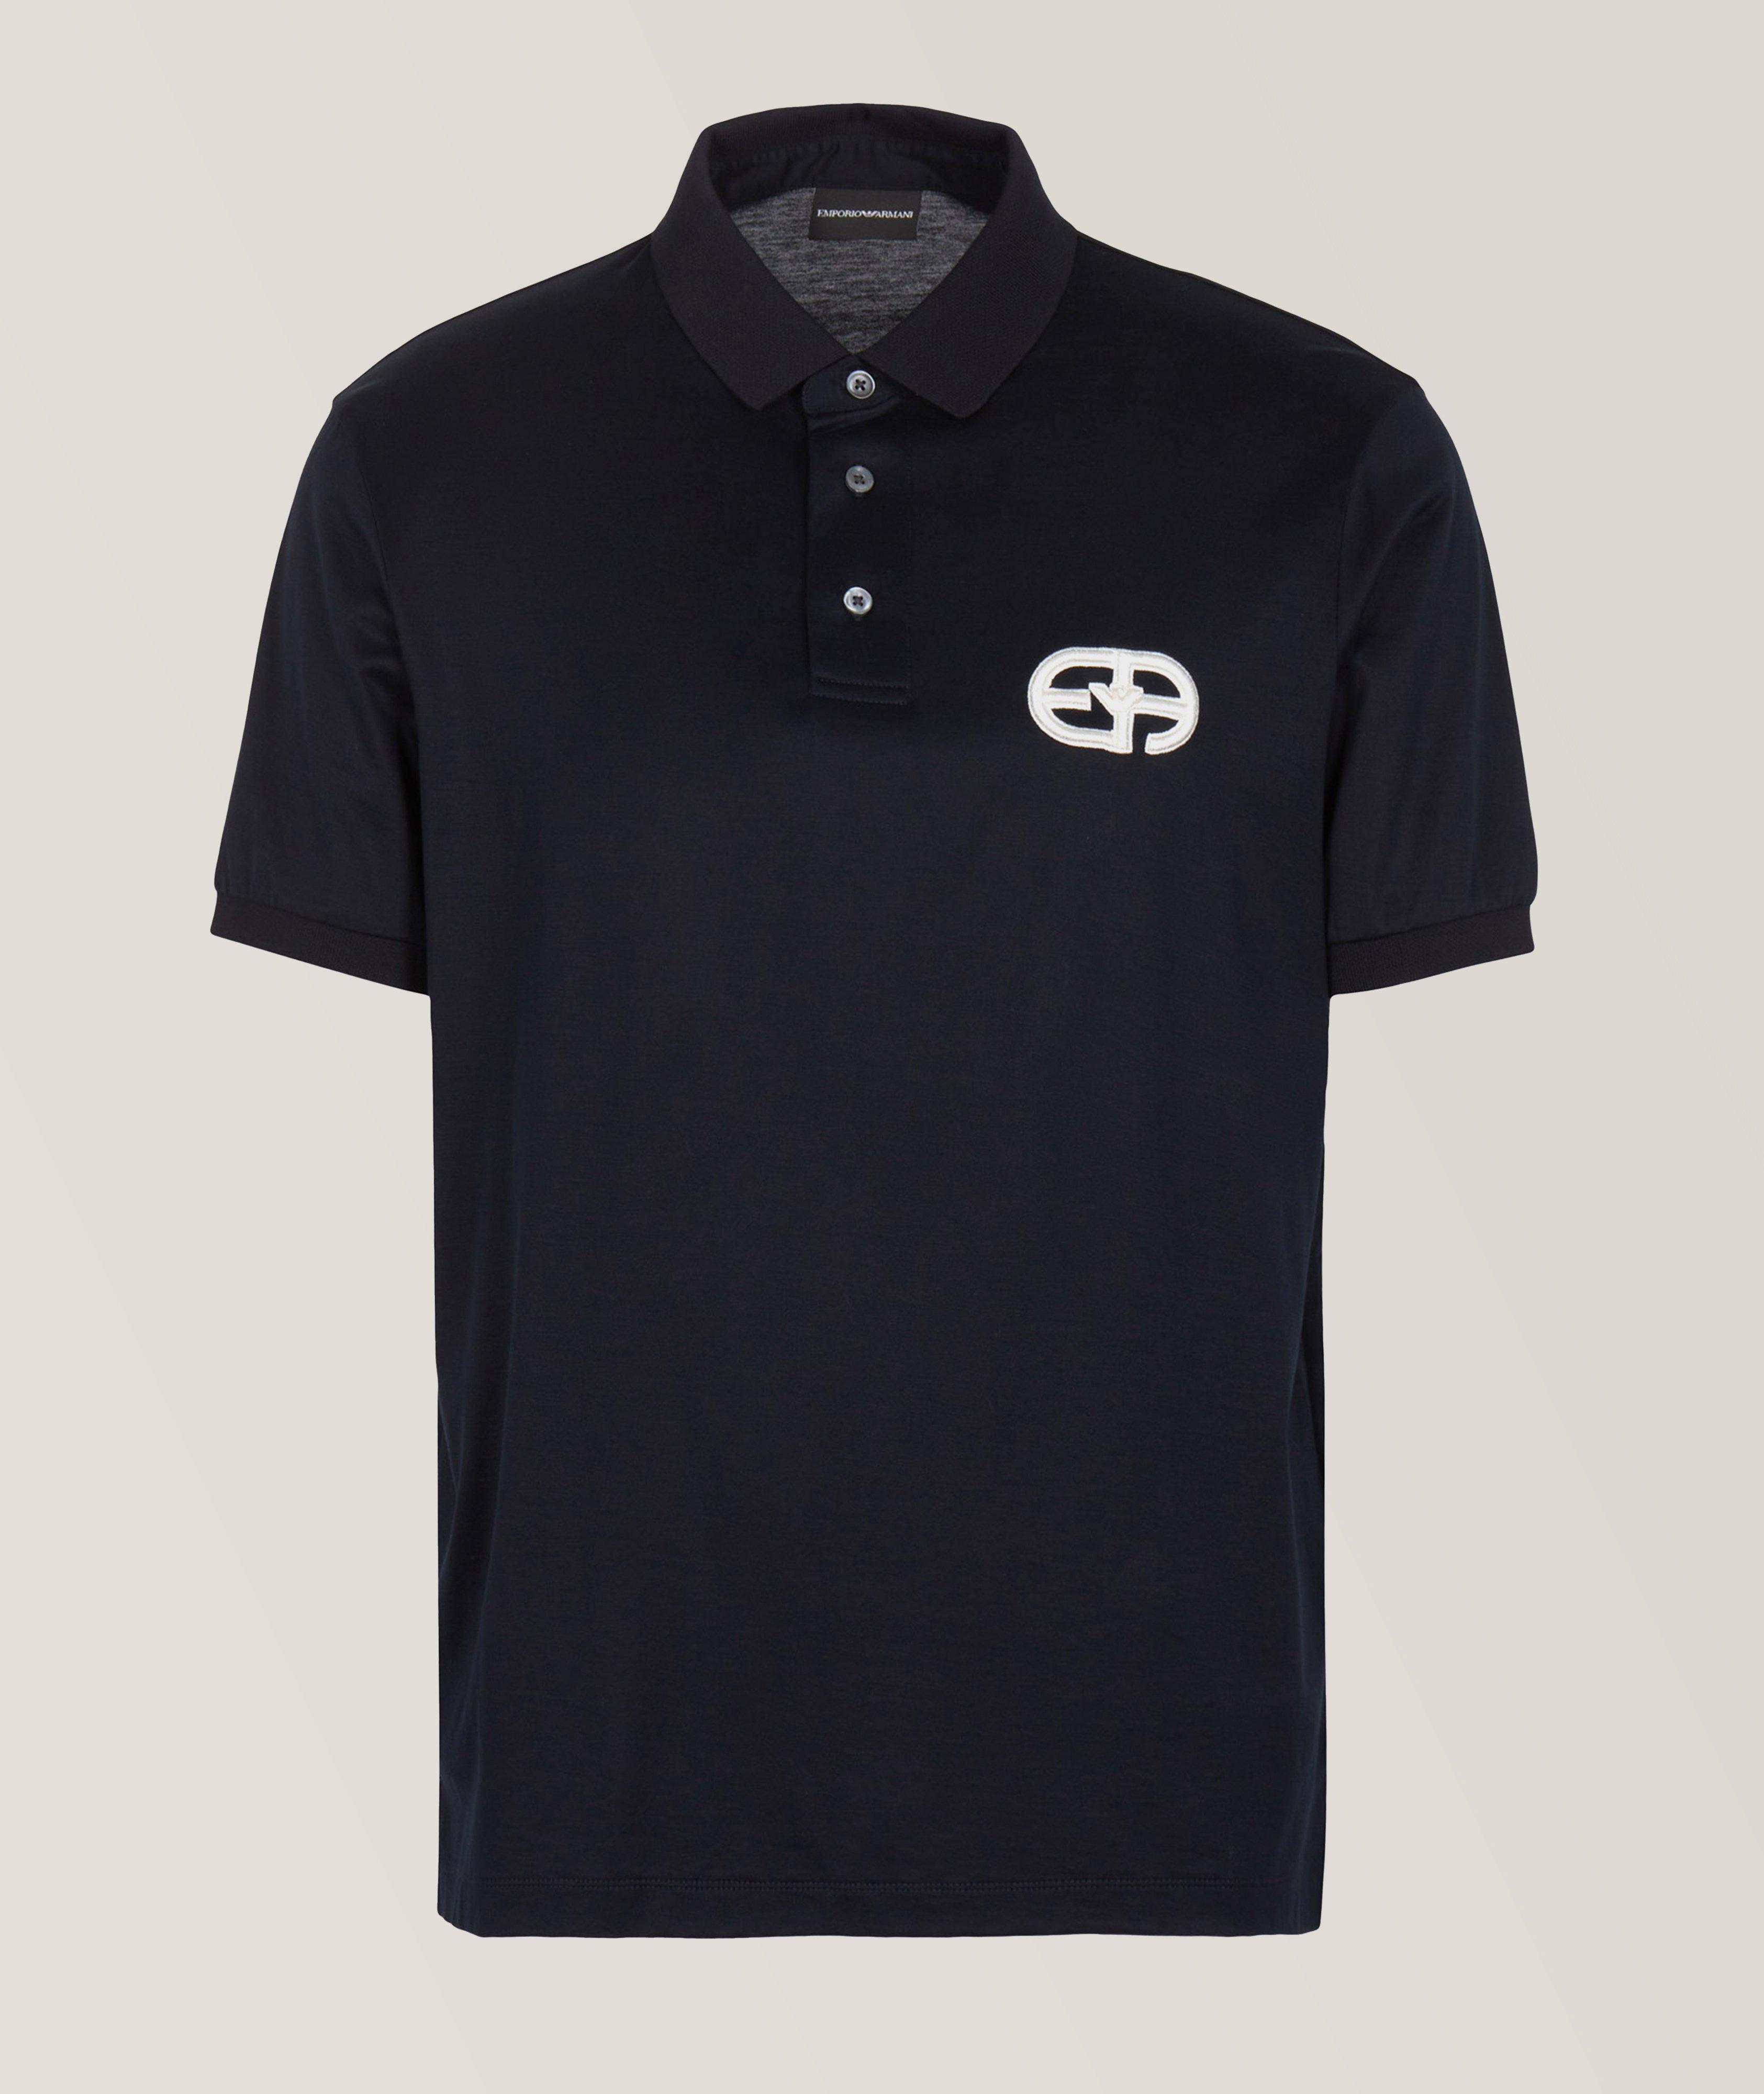 Embroidered Logo Tencel-Cotton Jersey Knit Polo image 0